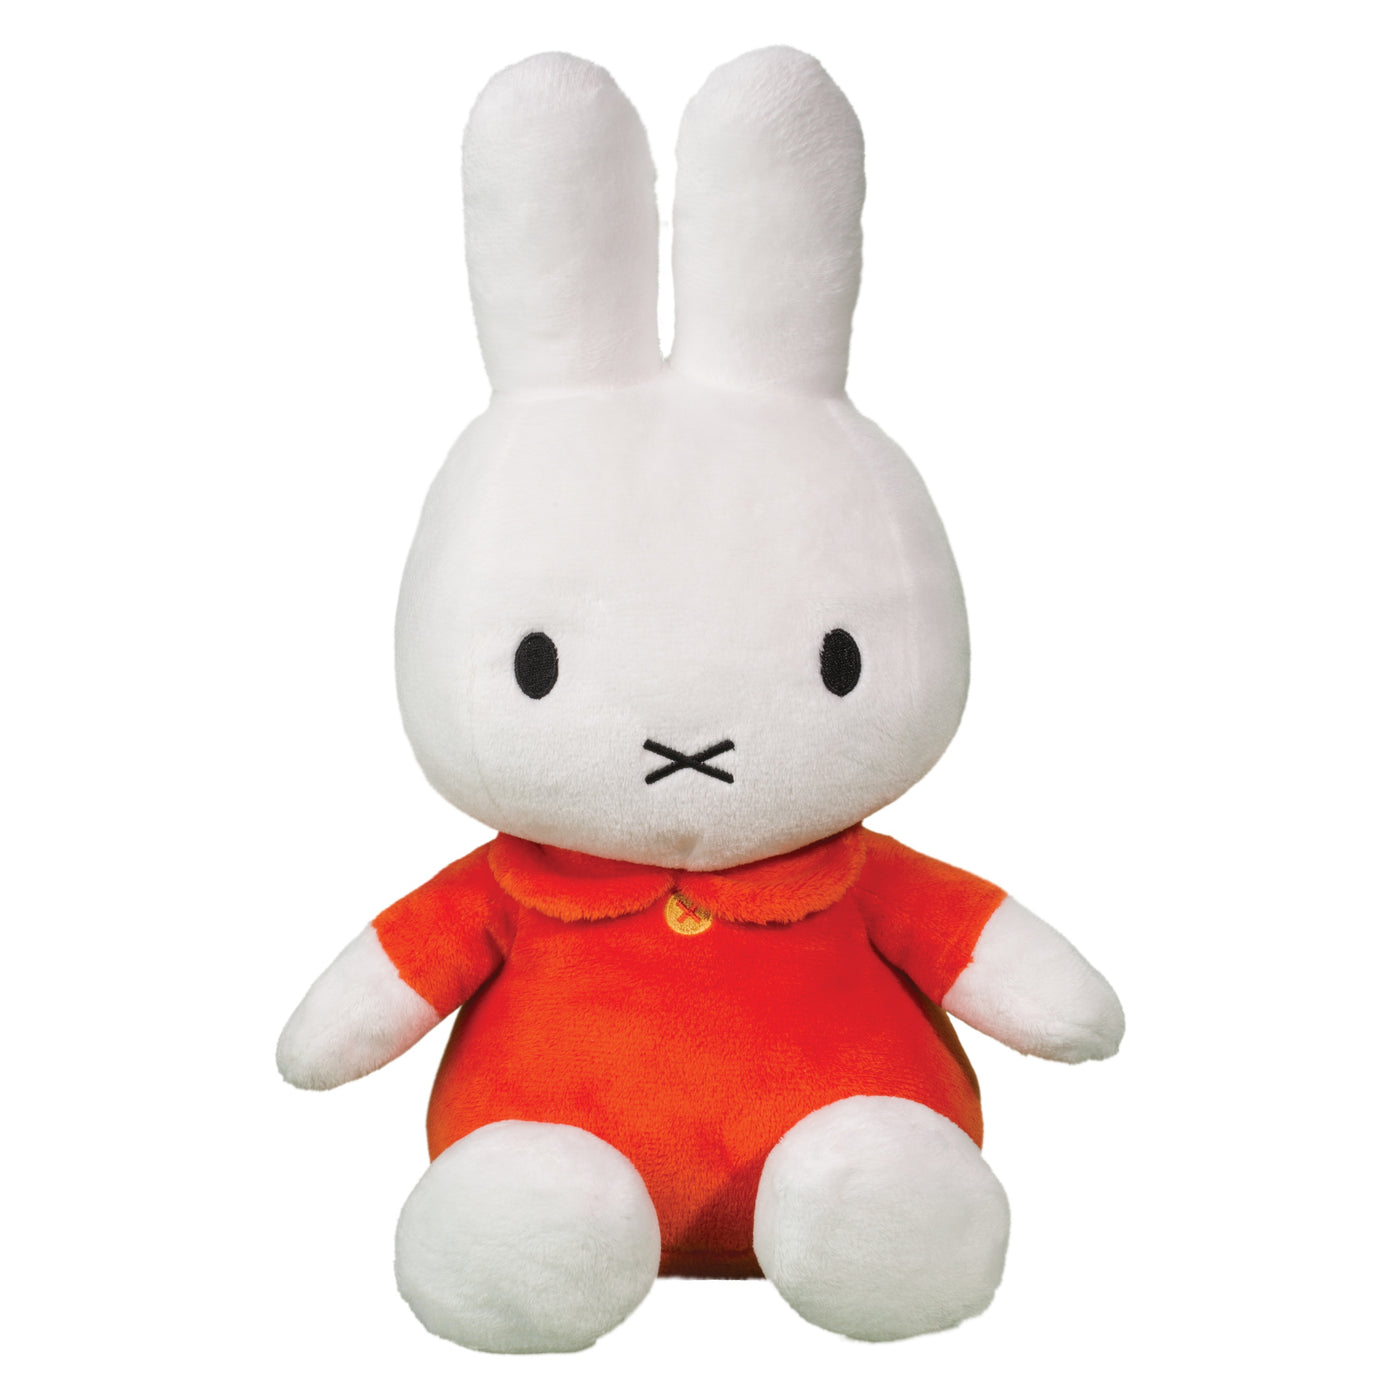 Miffy Classic Plush, Large Red by Douglas Toys